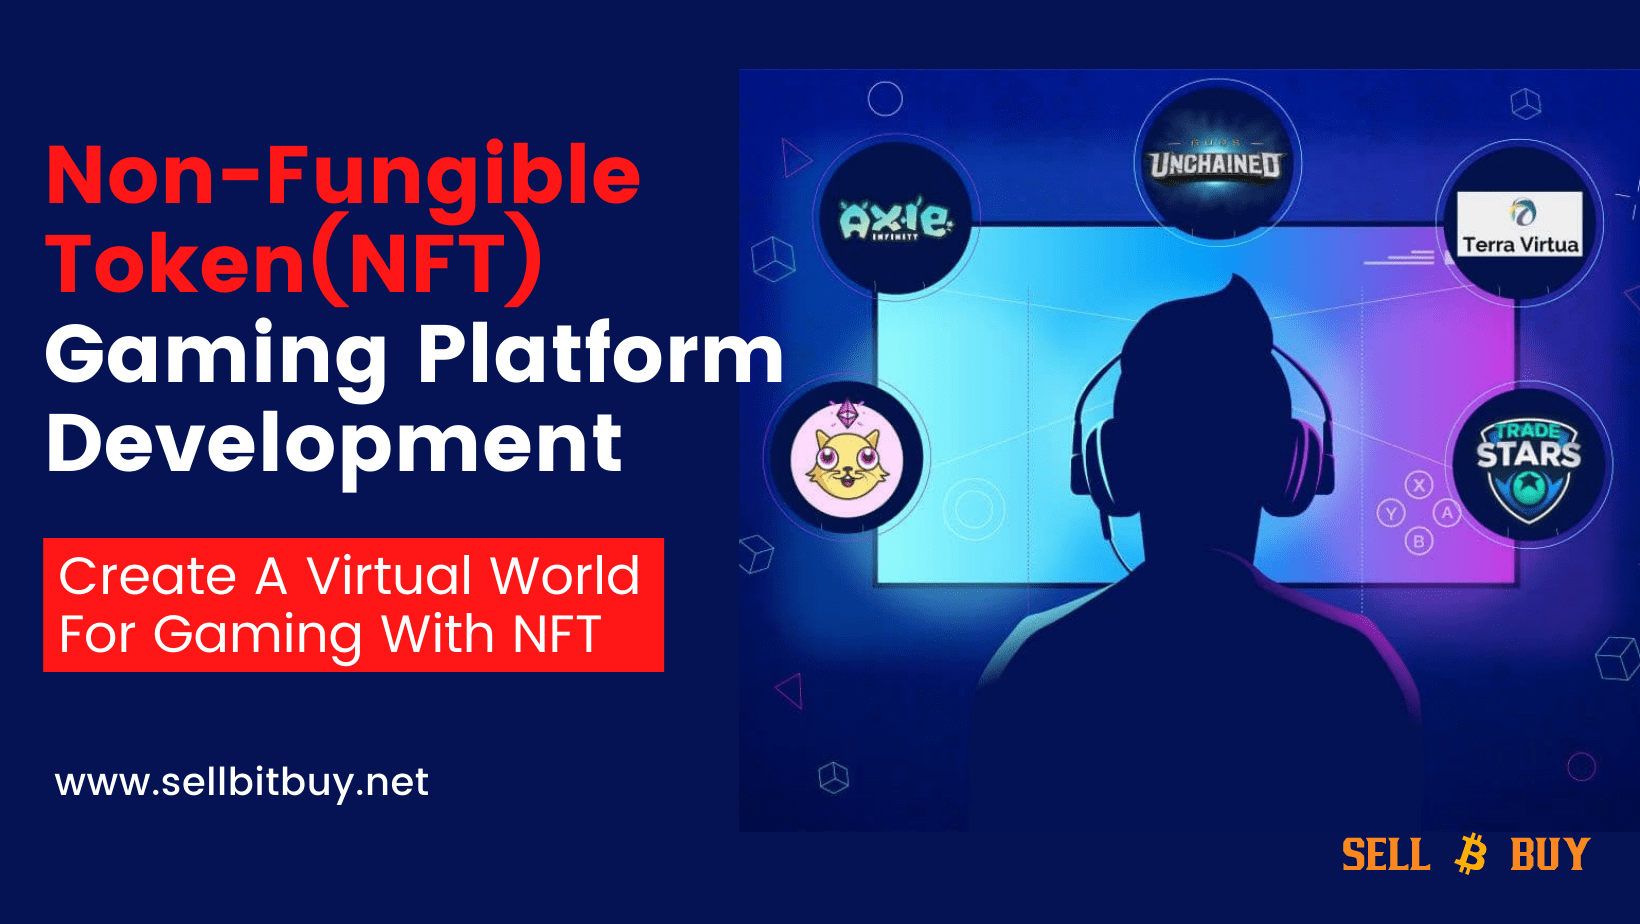 NFT Gaming Platform Development - Create A Virtual World For Gaming With NFT